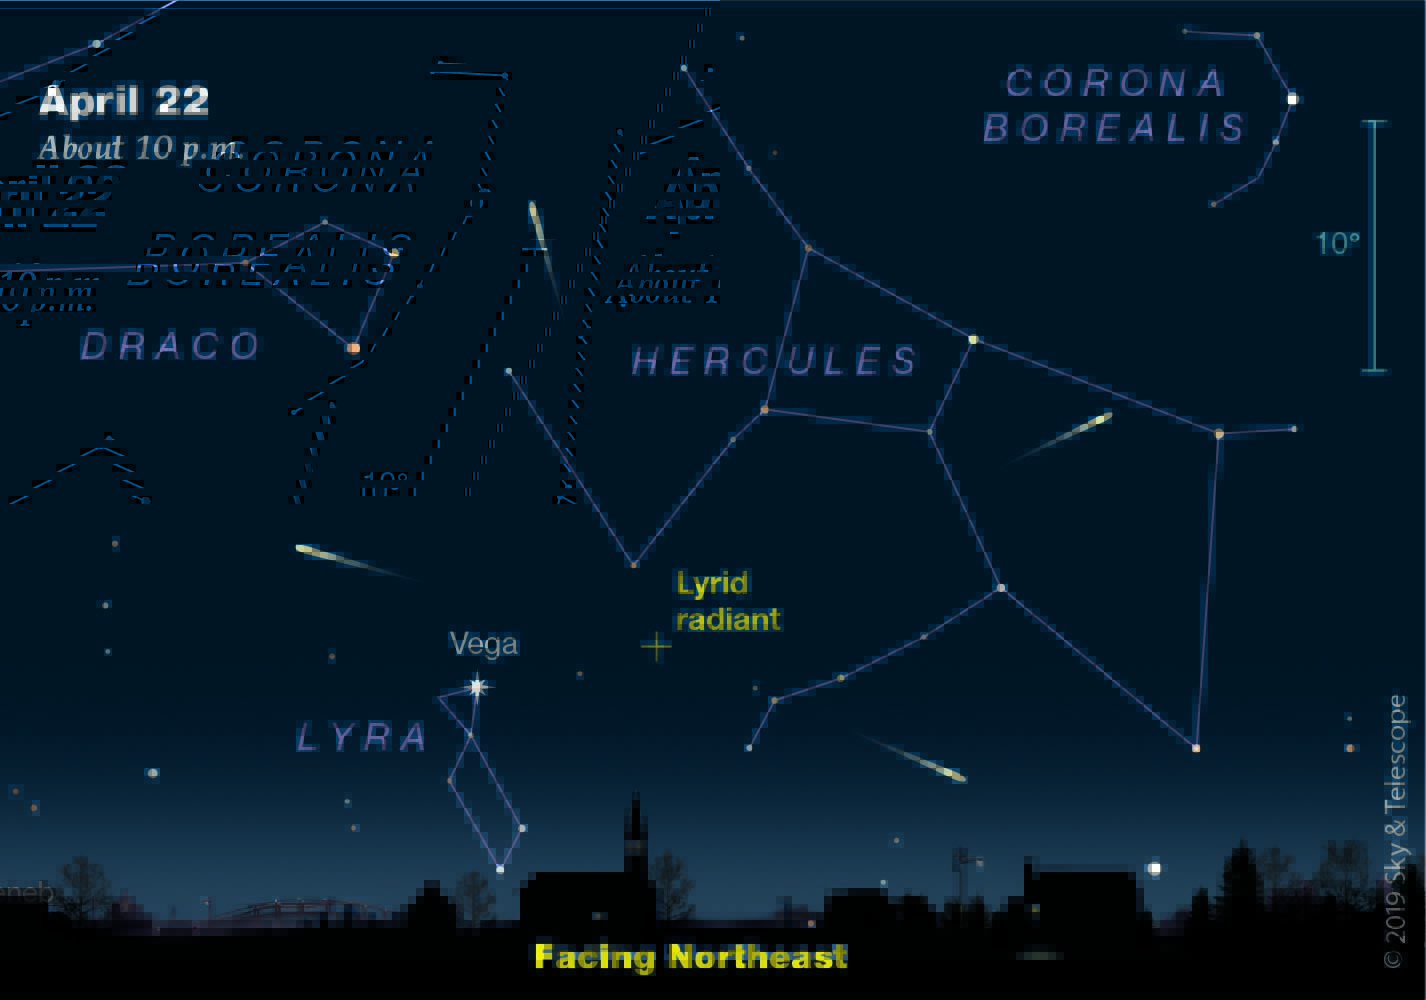 Get ready for the Lyrid meteor shower peak across Europe and the United